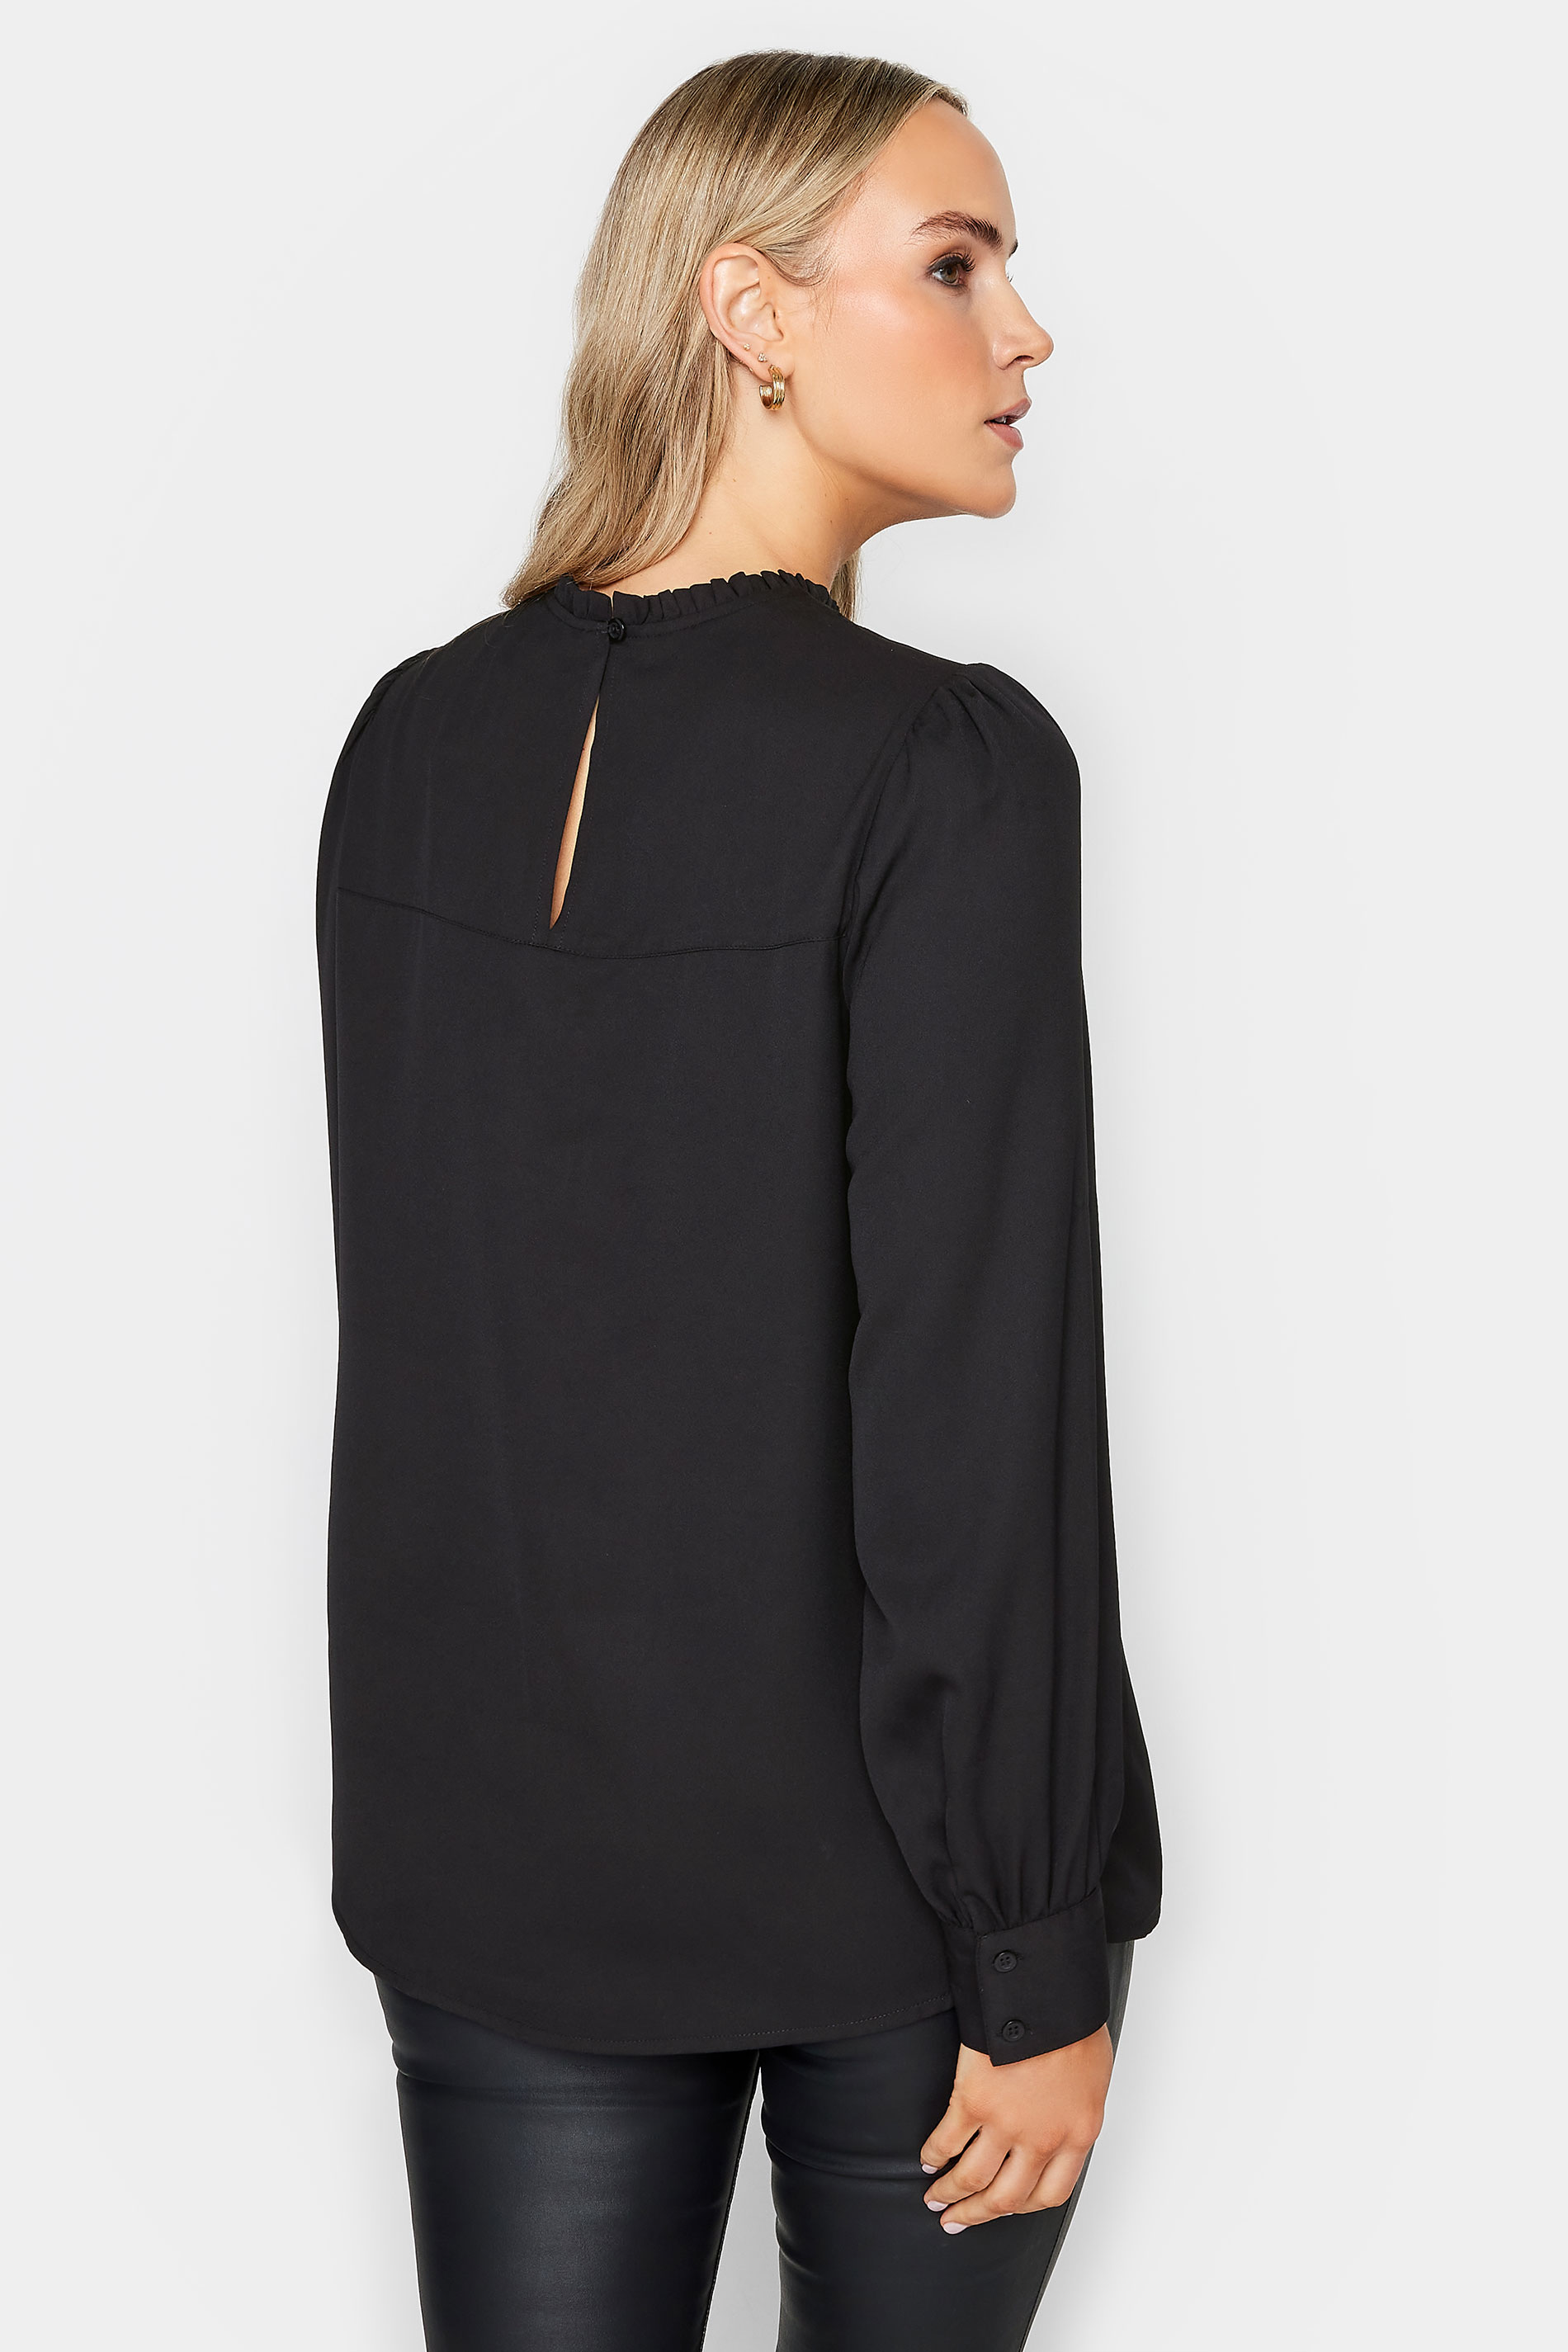 LTS Tall Black Lace Detail Blouse | Long Tall Sally  3